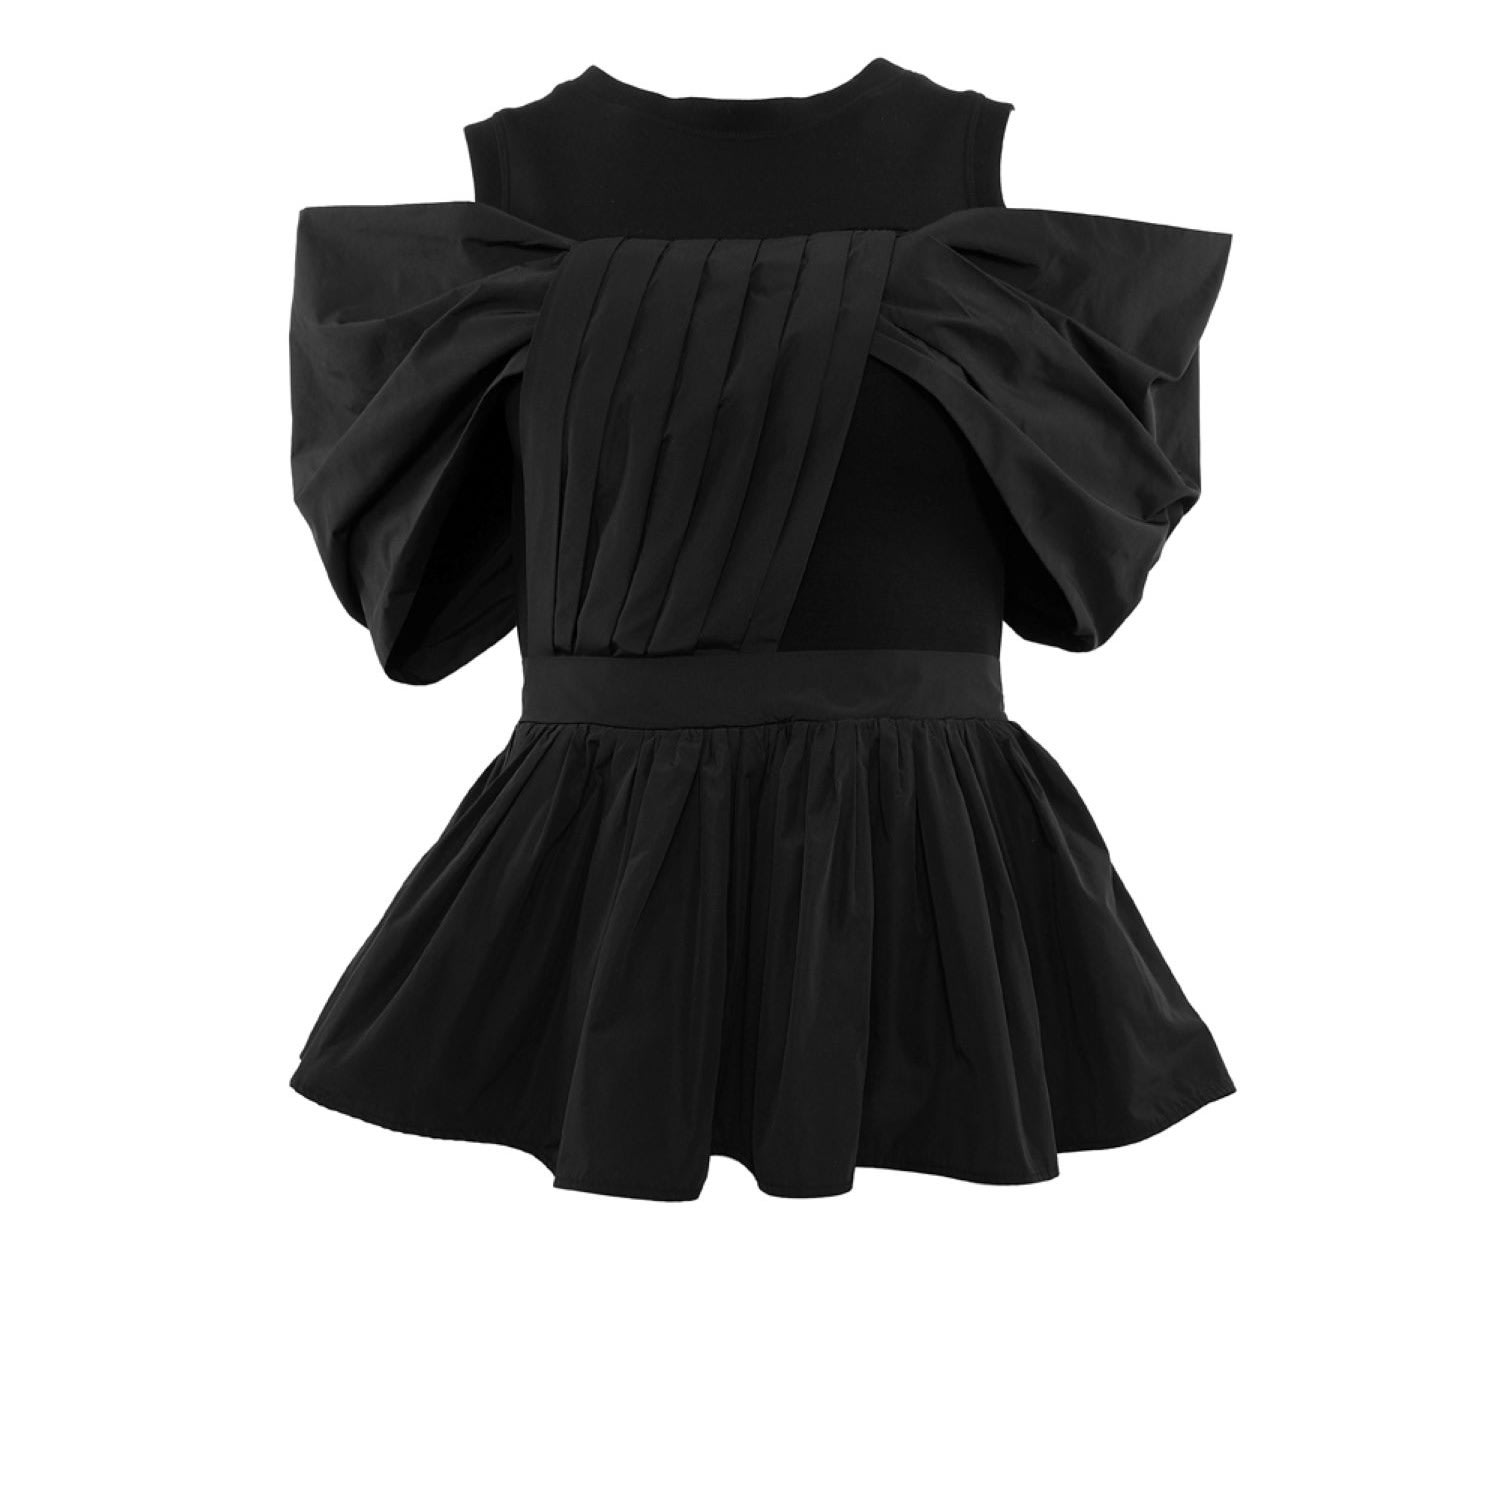 Theo The Label Women's Black Aphrodite Bow Top